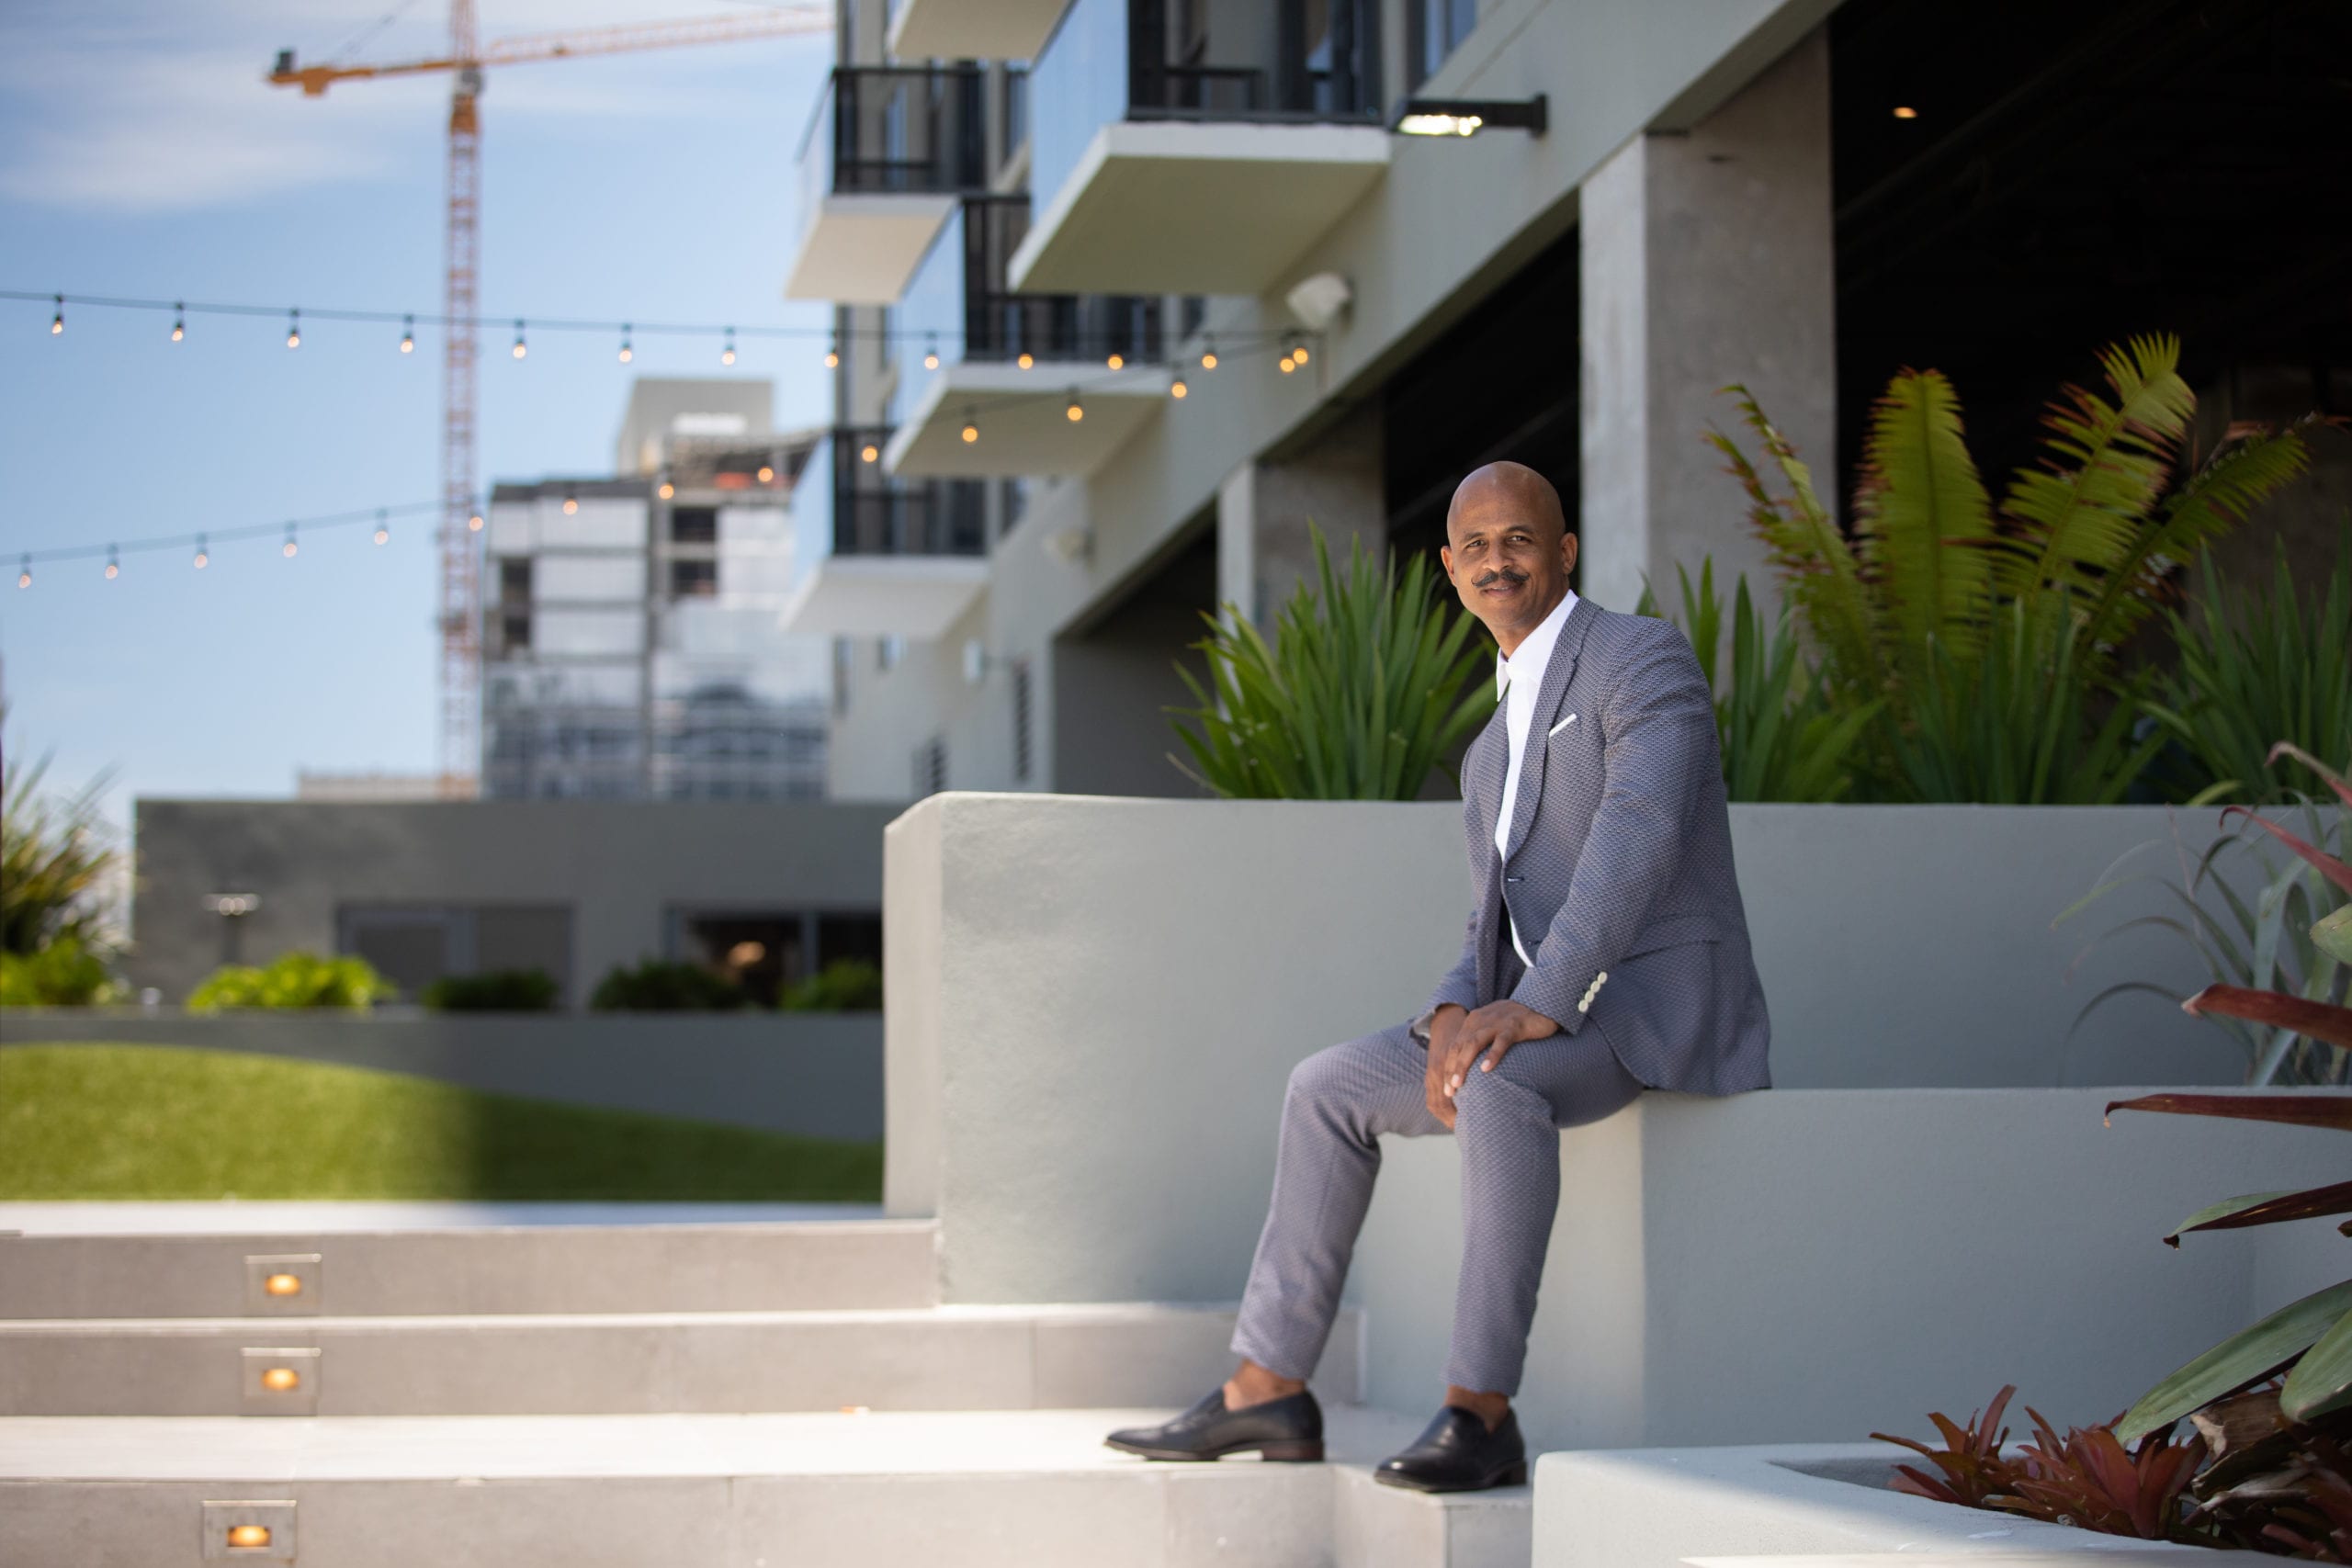 Fort Lauderdale Illustrated Men of Style Bald African American male model with moustache wearing gray suit and white shirt sitting near stairs